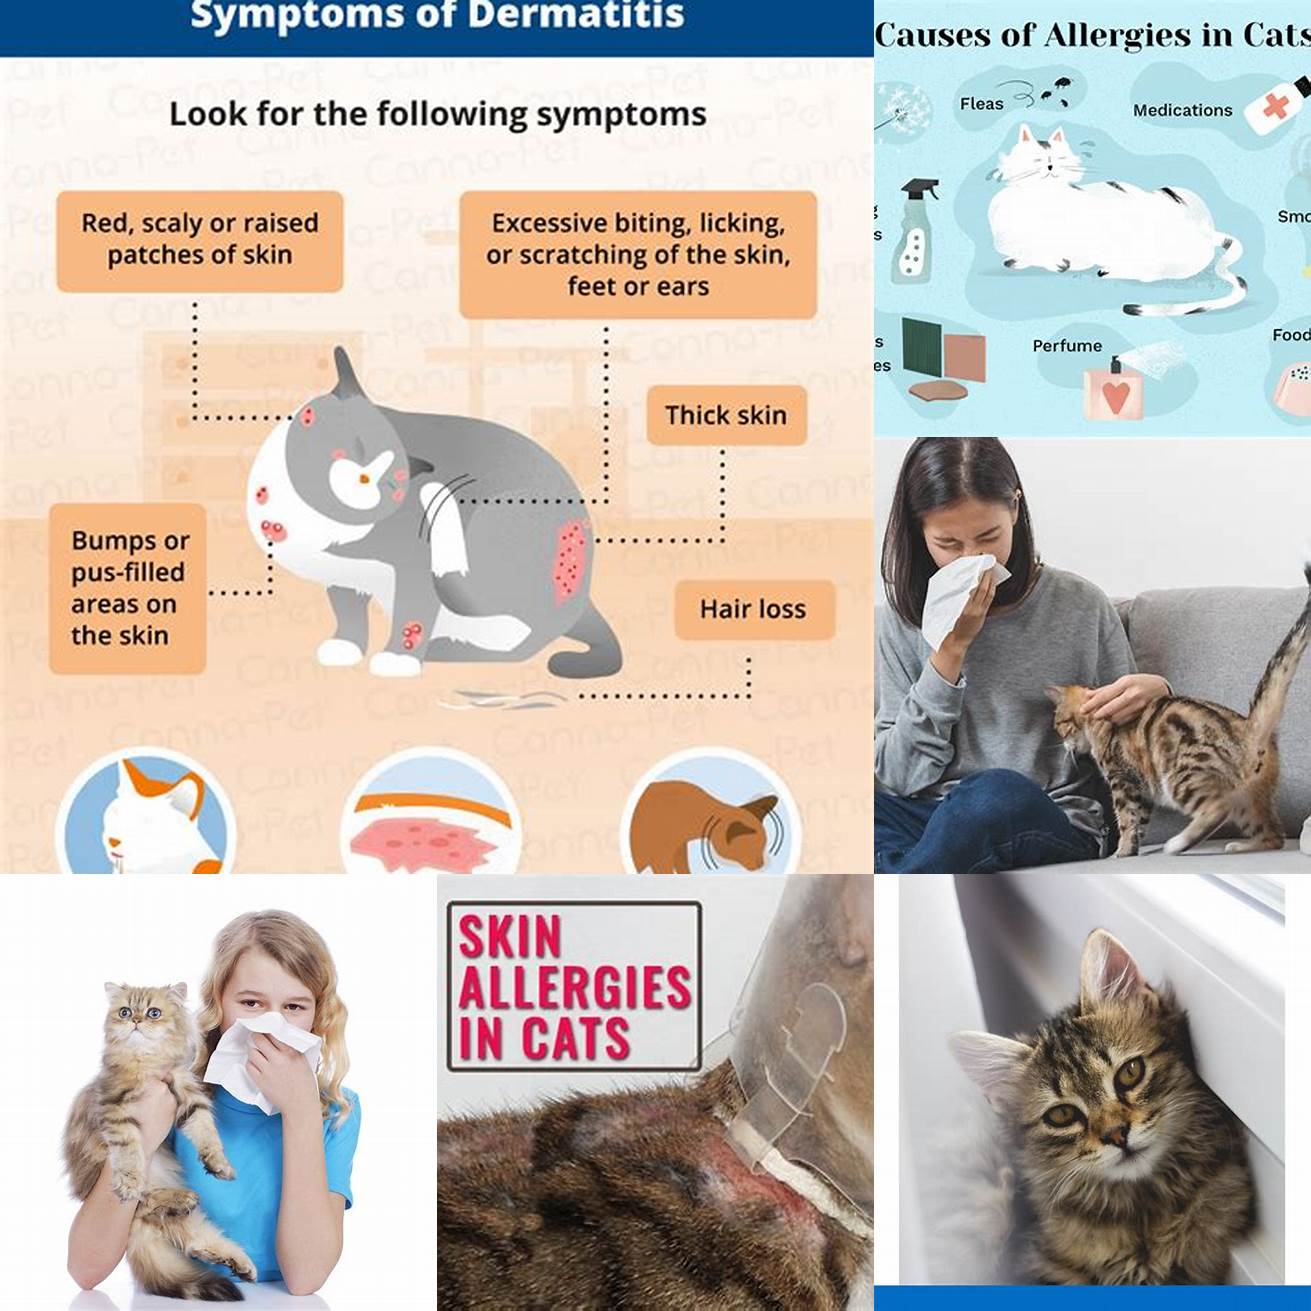 Allergic Reactions Some cats may be allergic to the fluids used in enemas which can cause serious allergic reactions